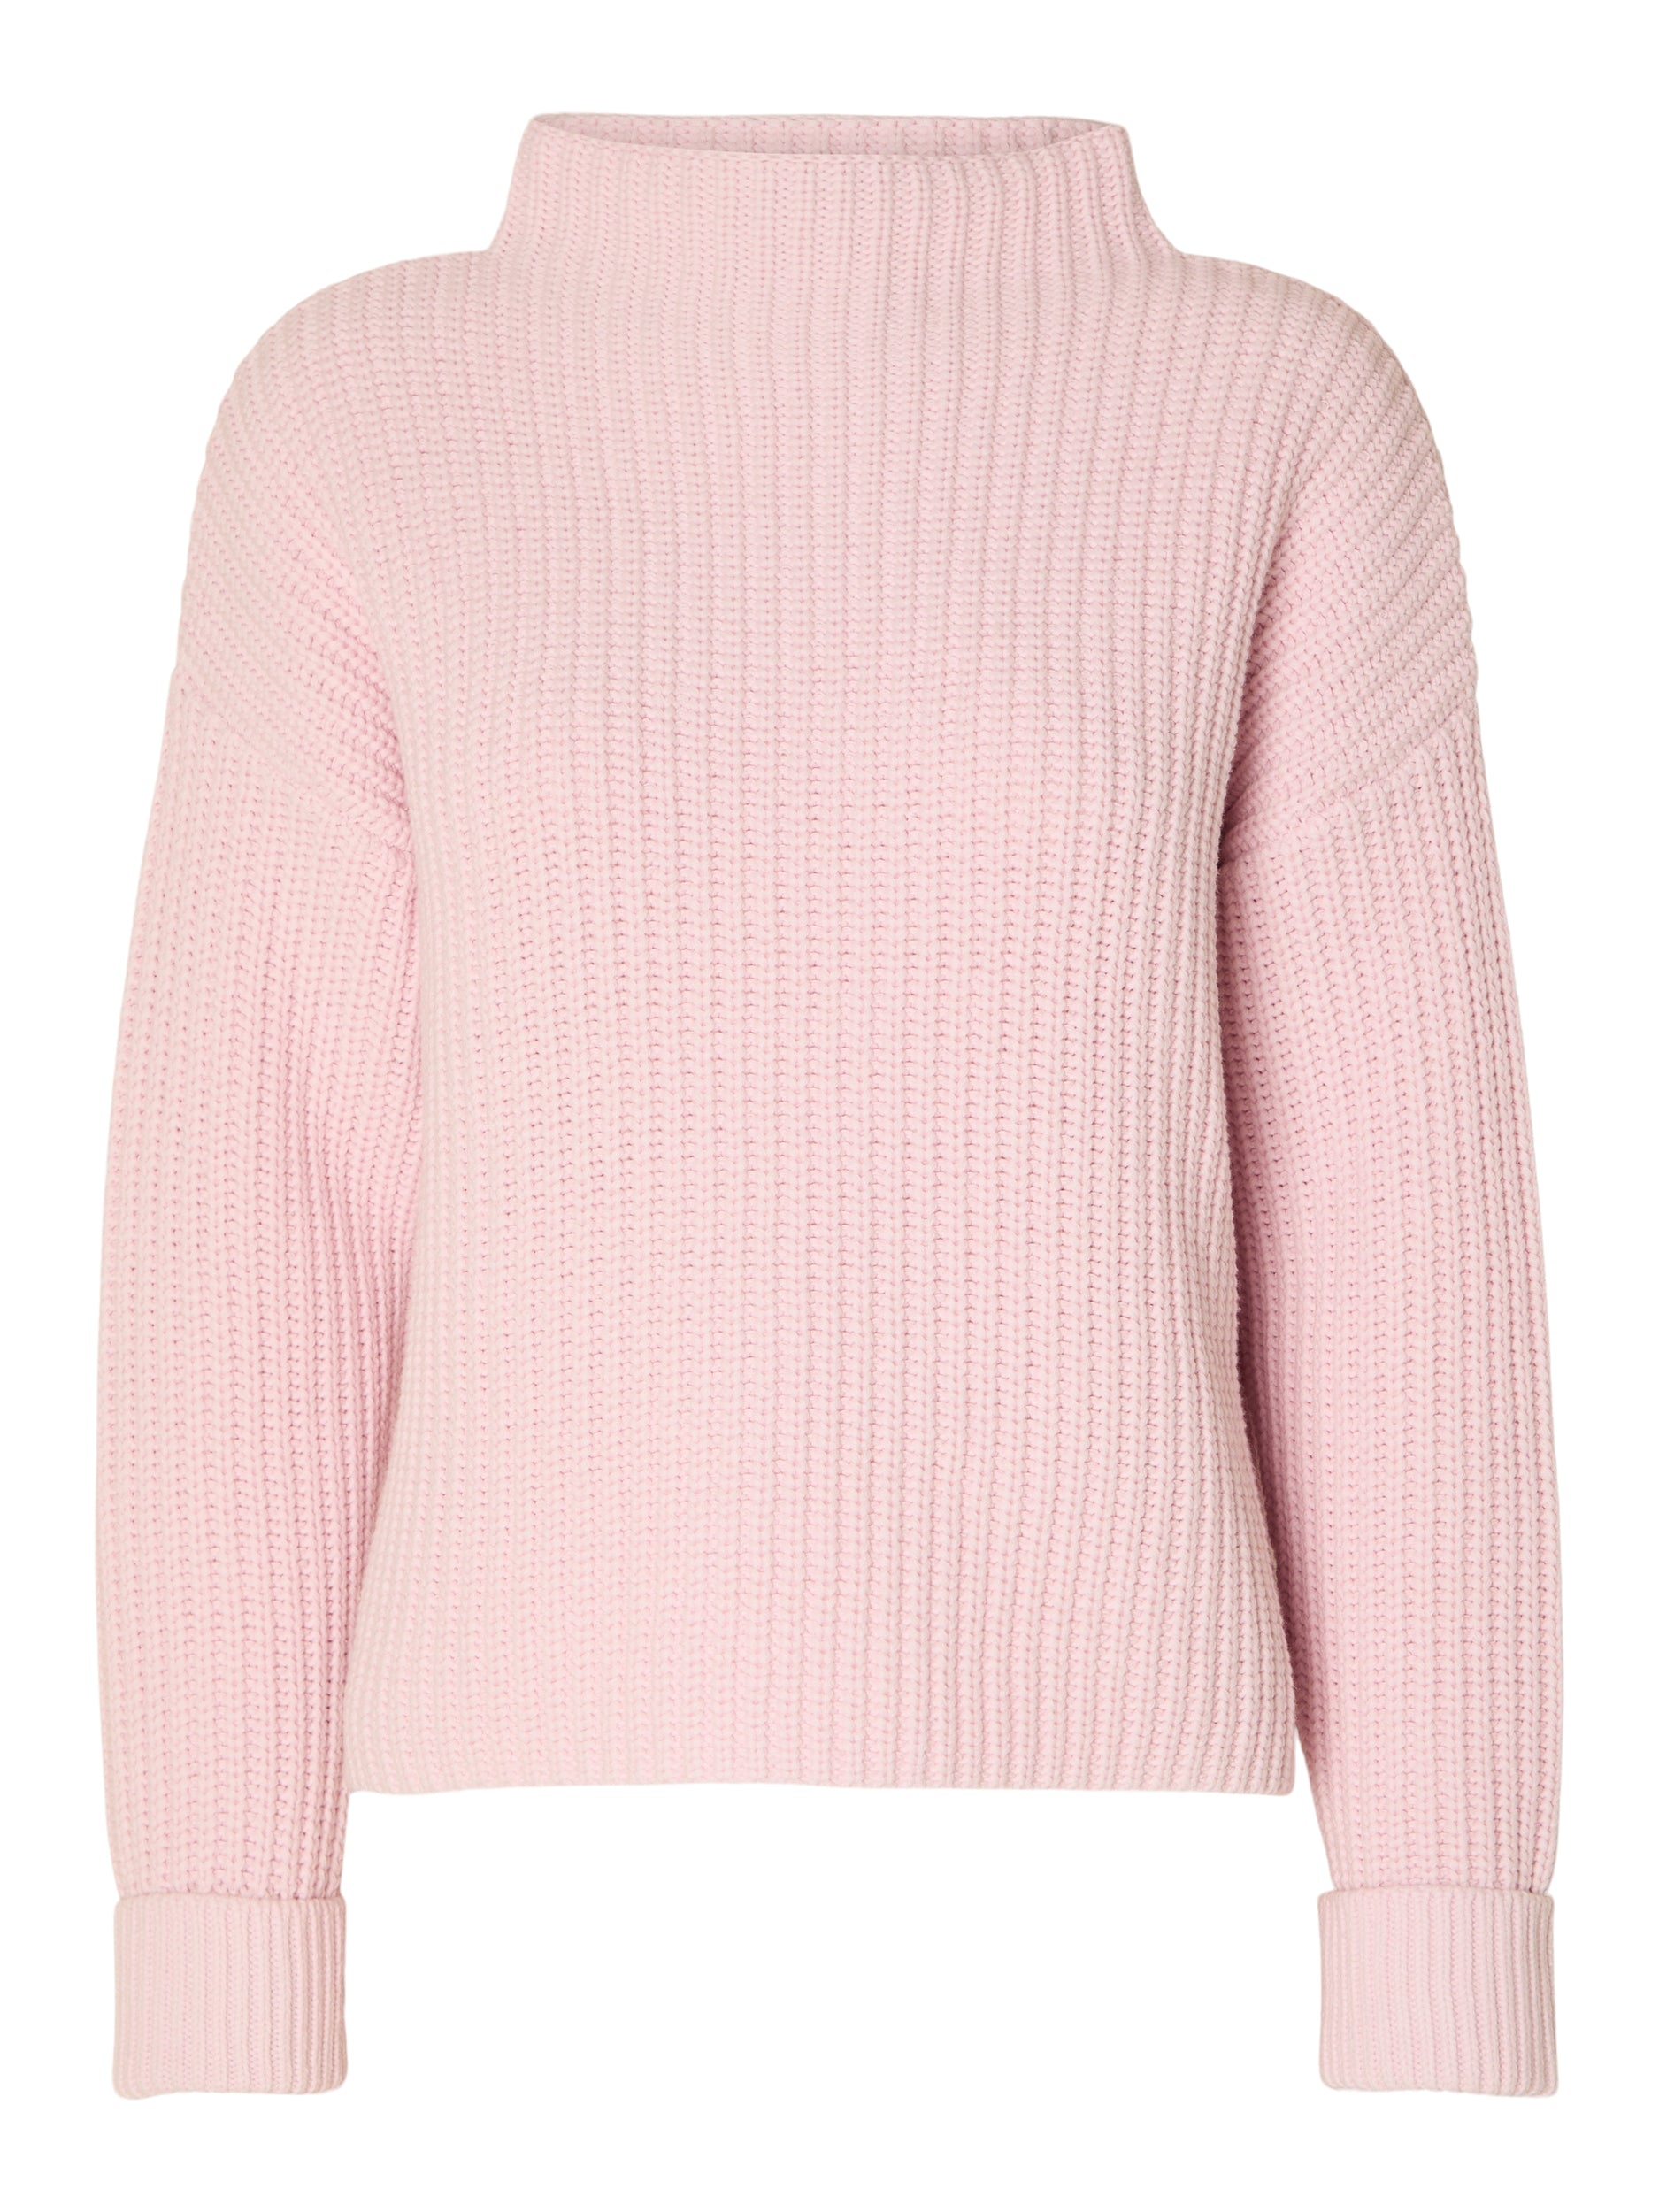 Selected Femme "Selma" Knit Pullover rosa